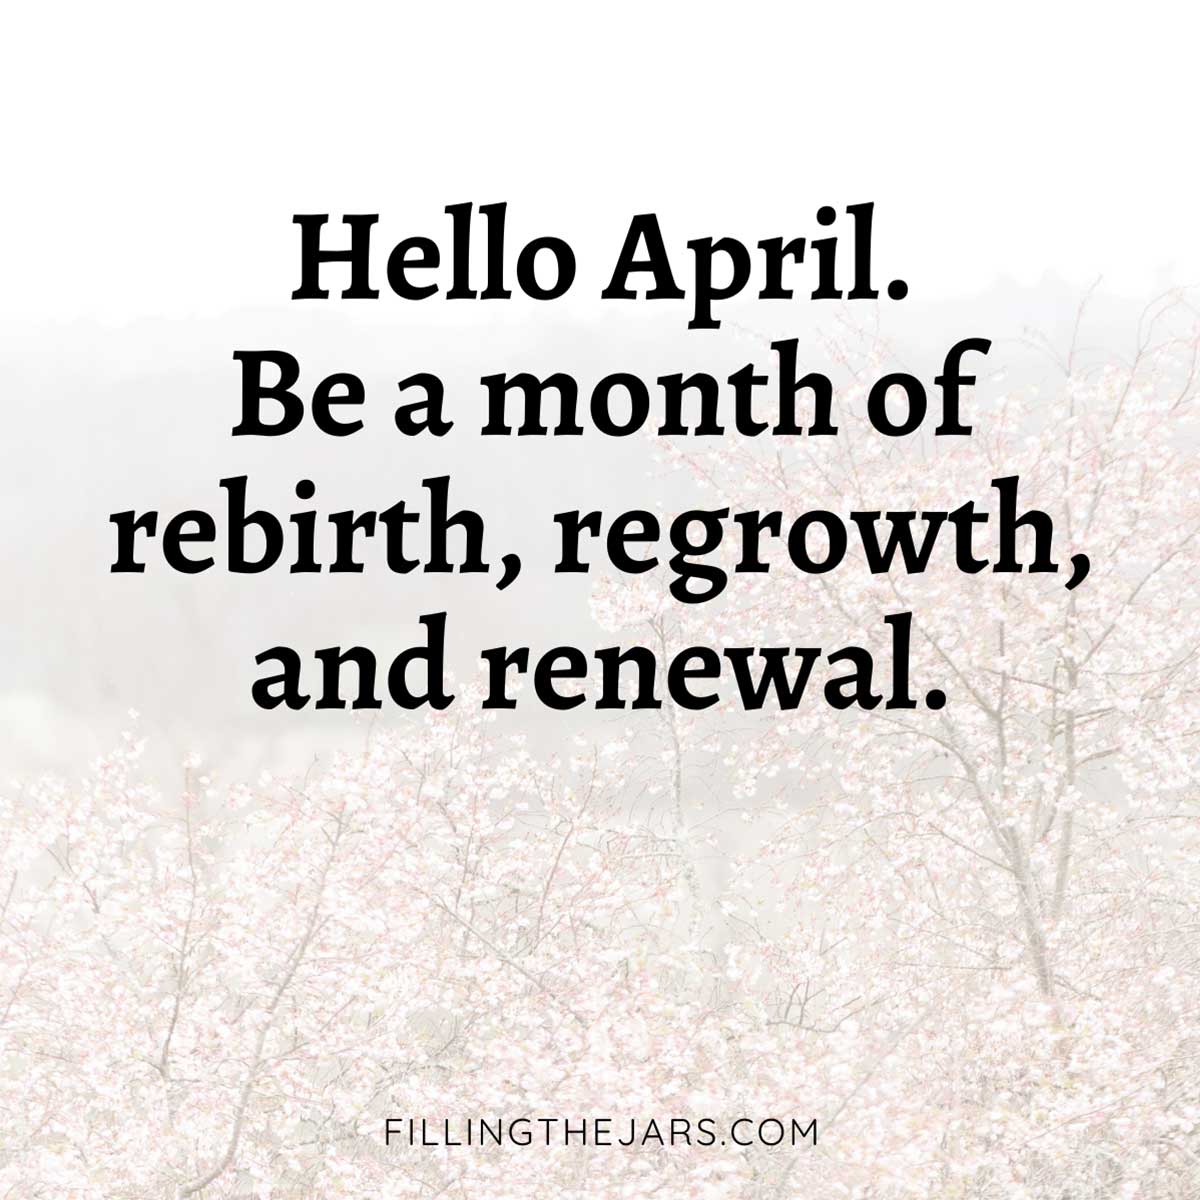 Hello April quote in black text on faded background image of spring flowering trees.